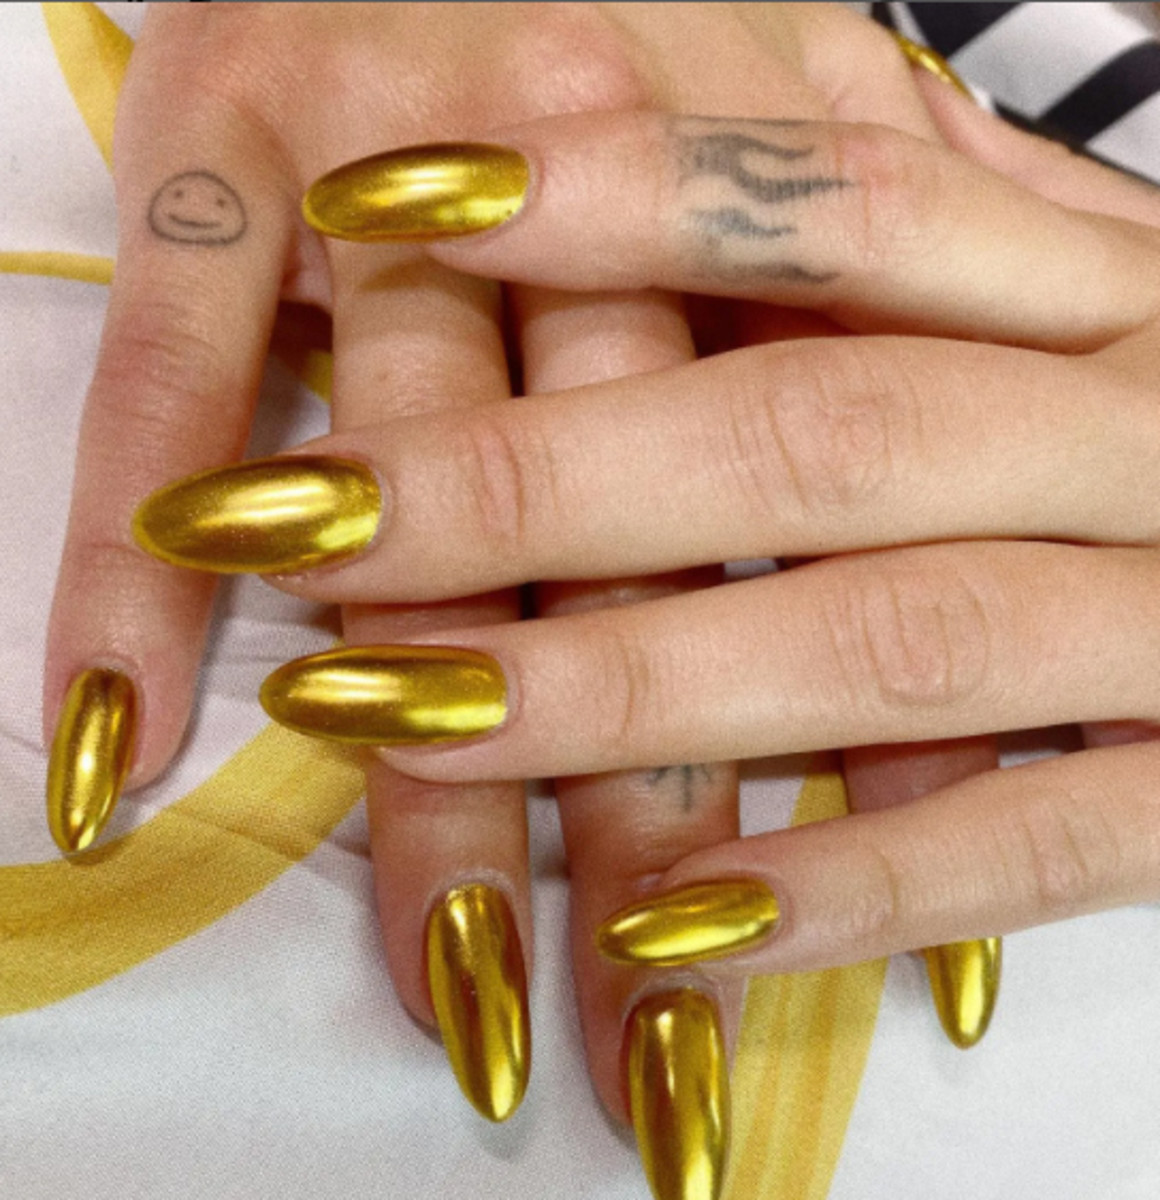 6 Chrome Nail Looks You Have to Try - V Magazine